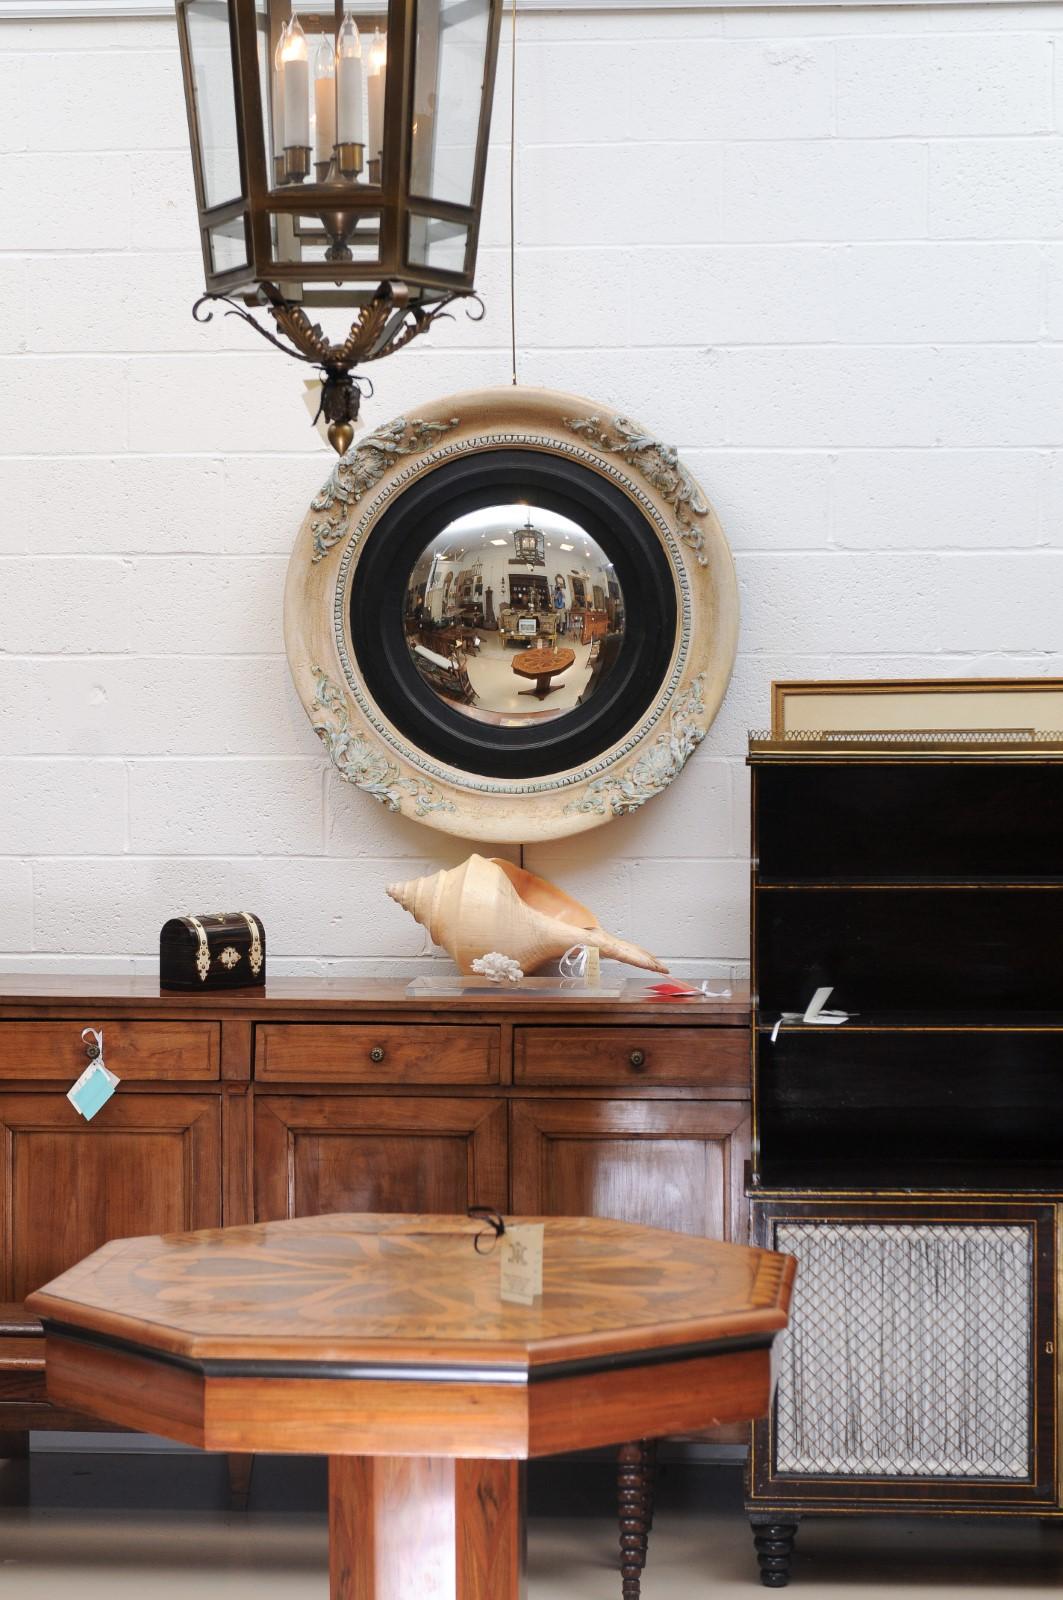 Large 19th Century English Painted Bullseye Mirror with Convex Glass 1